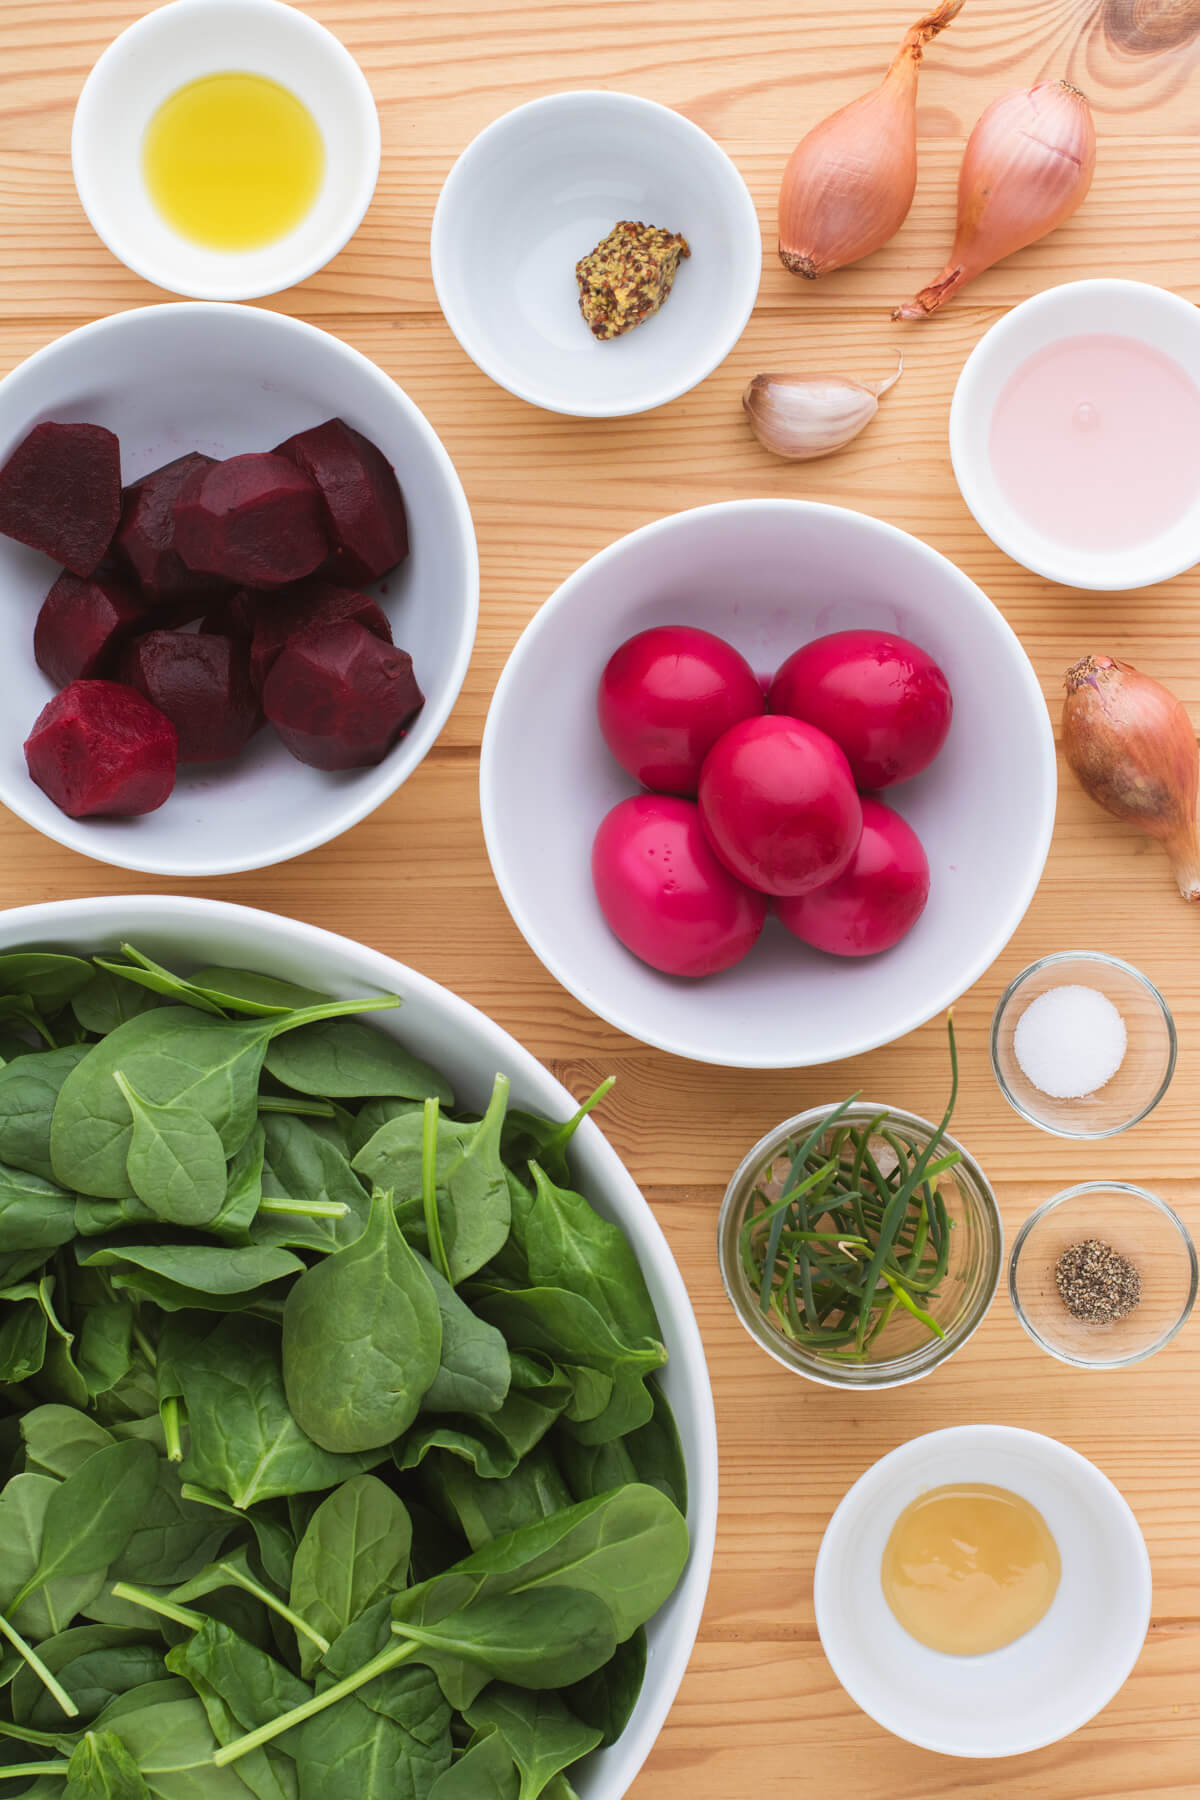 Ingredients needed to make beet spinach salad with beet pickled eggs and beets.